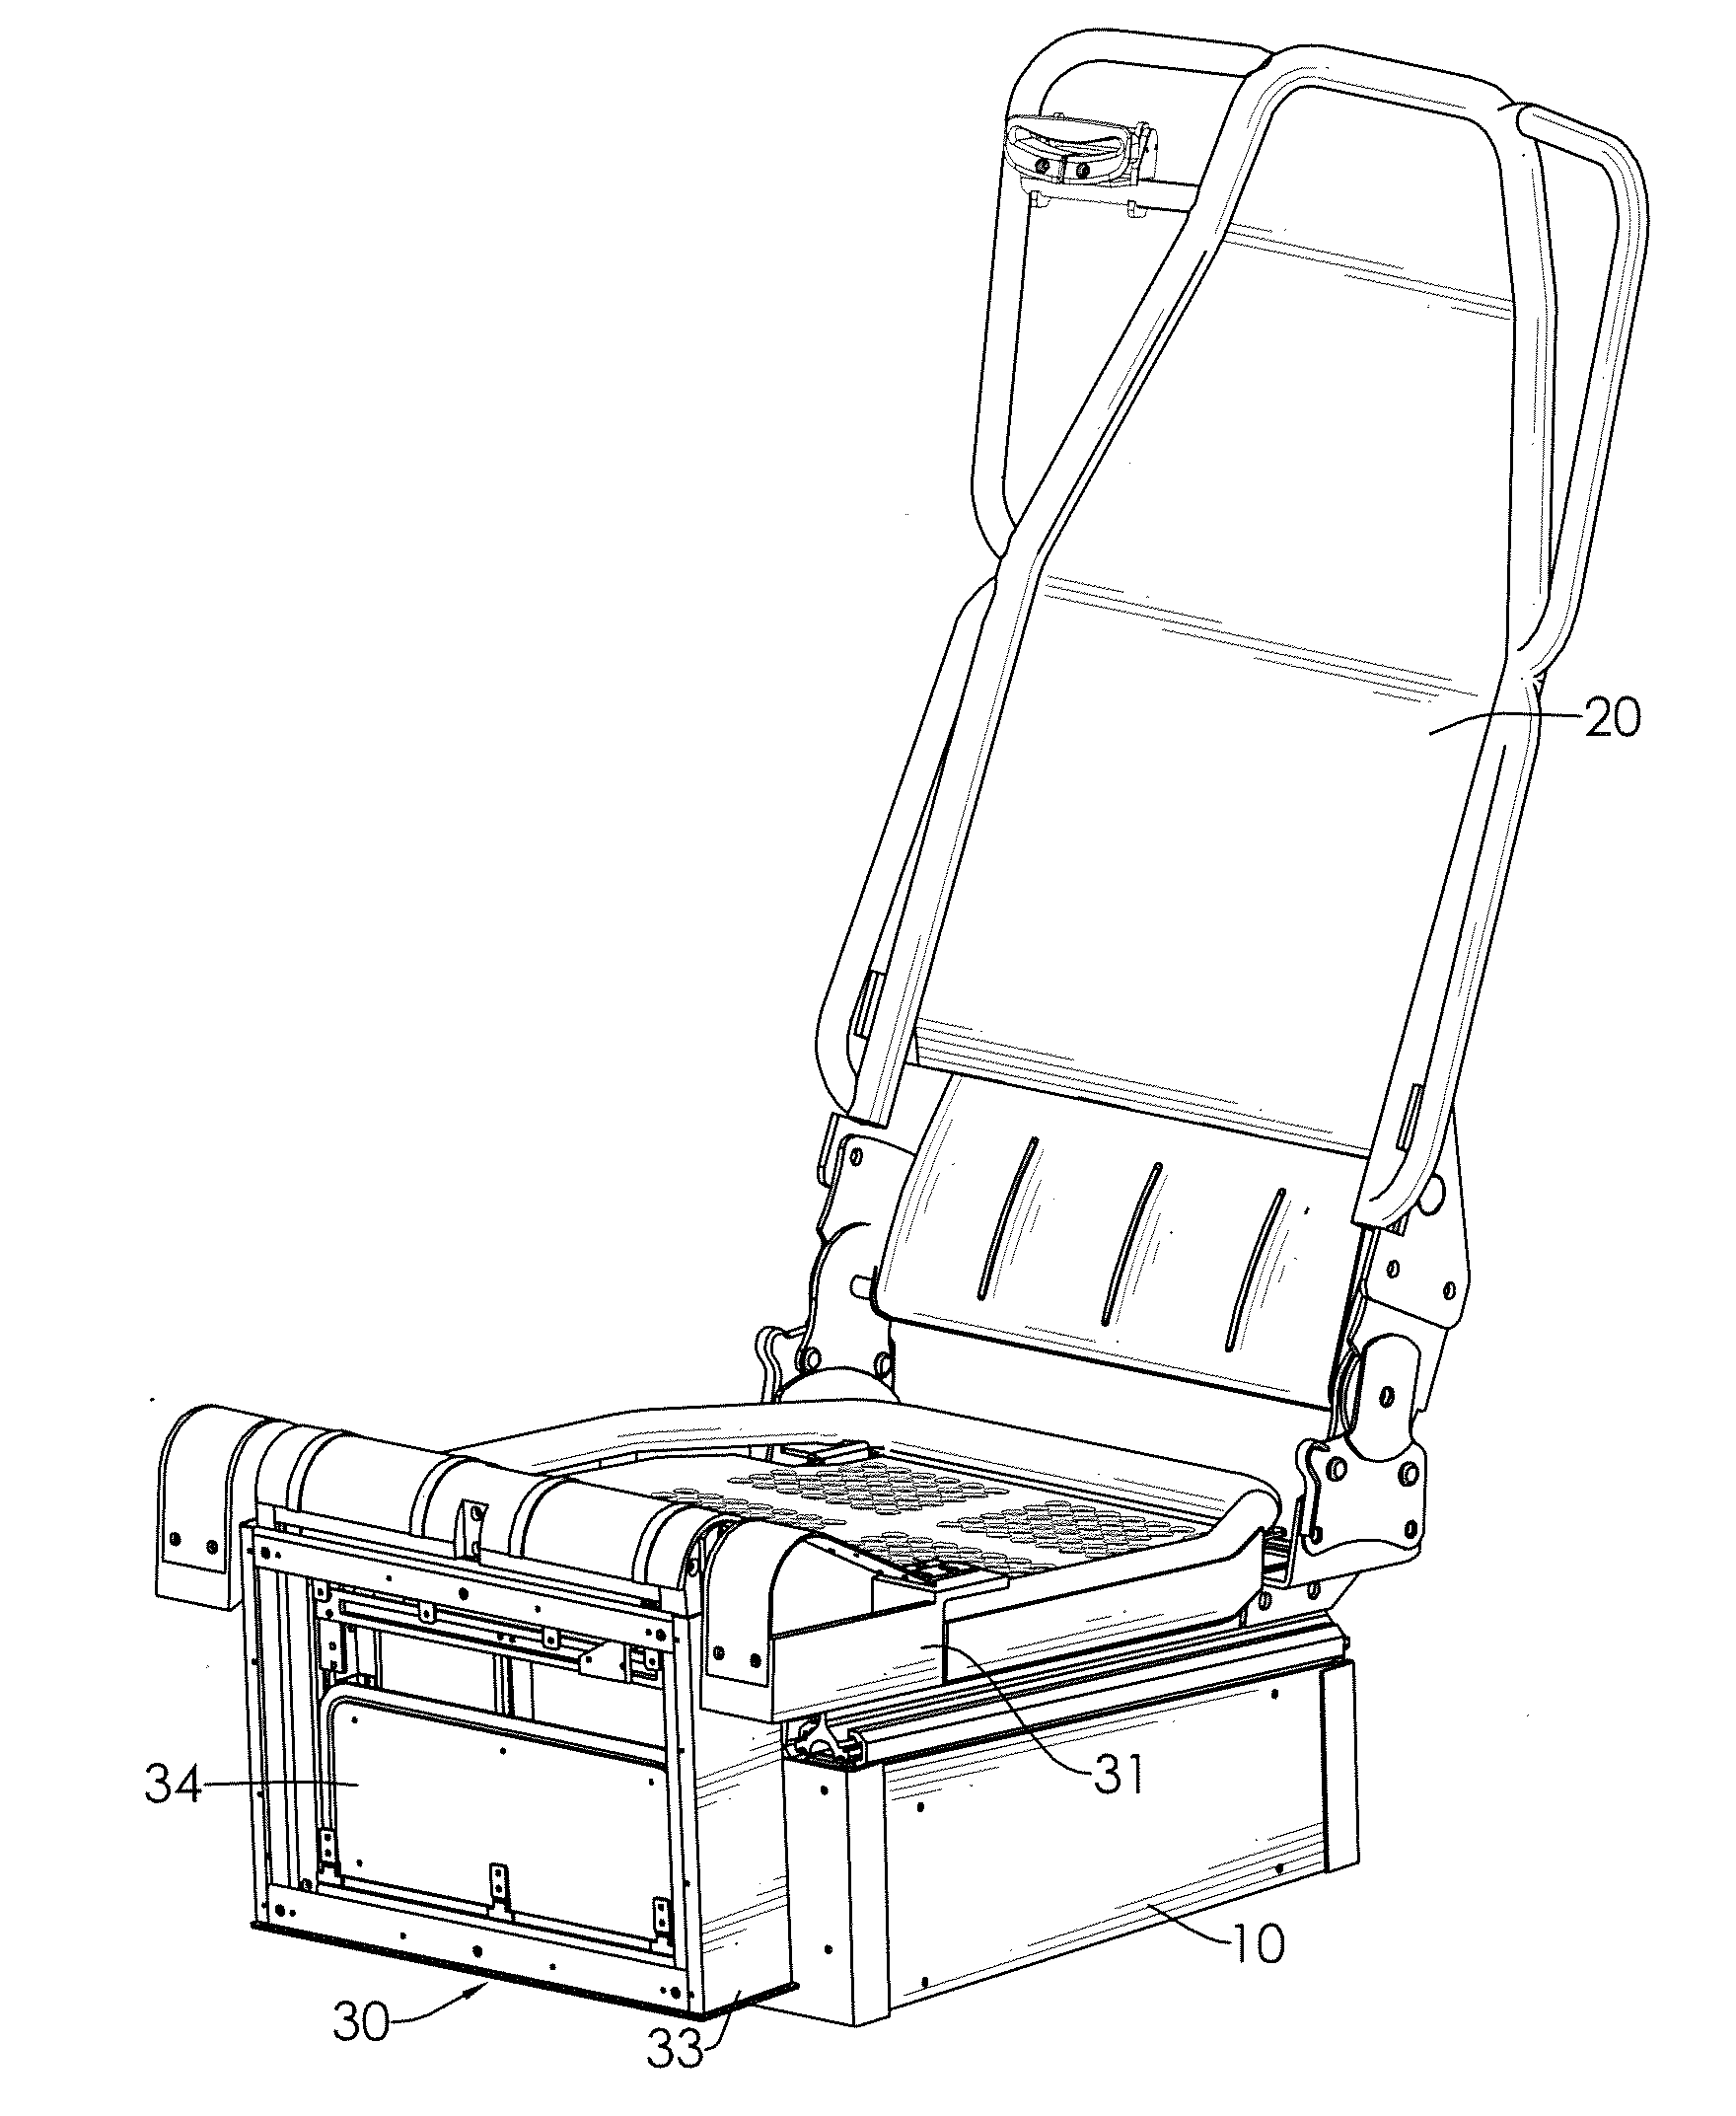 Expandable chair assembly